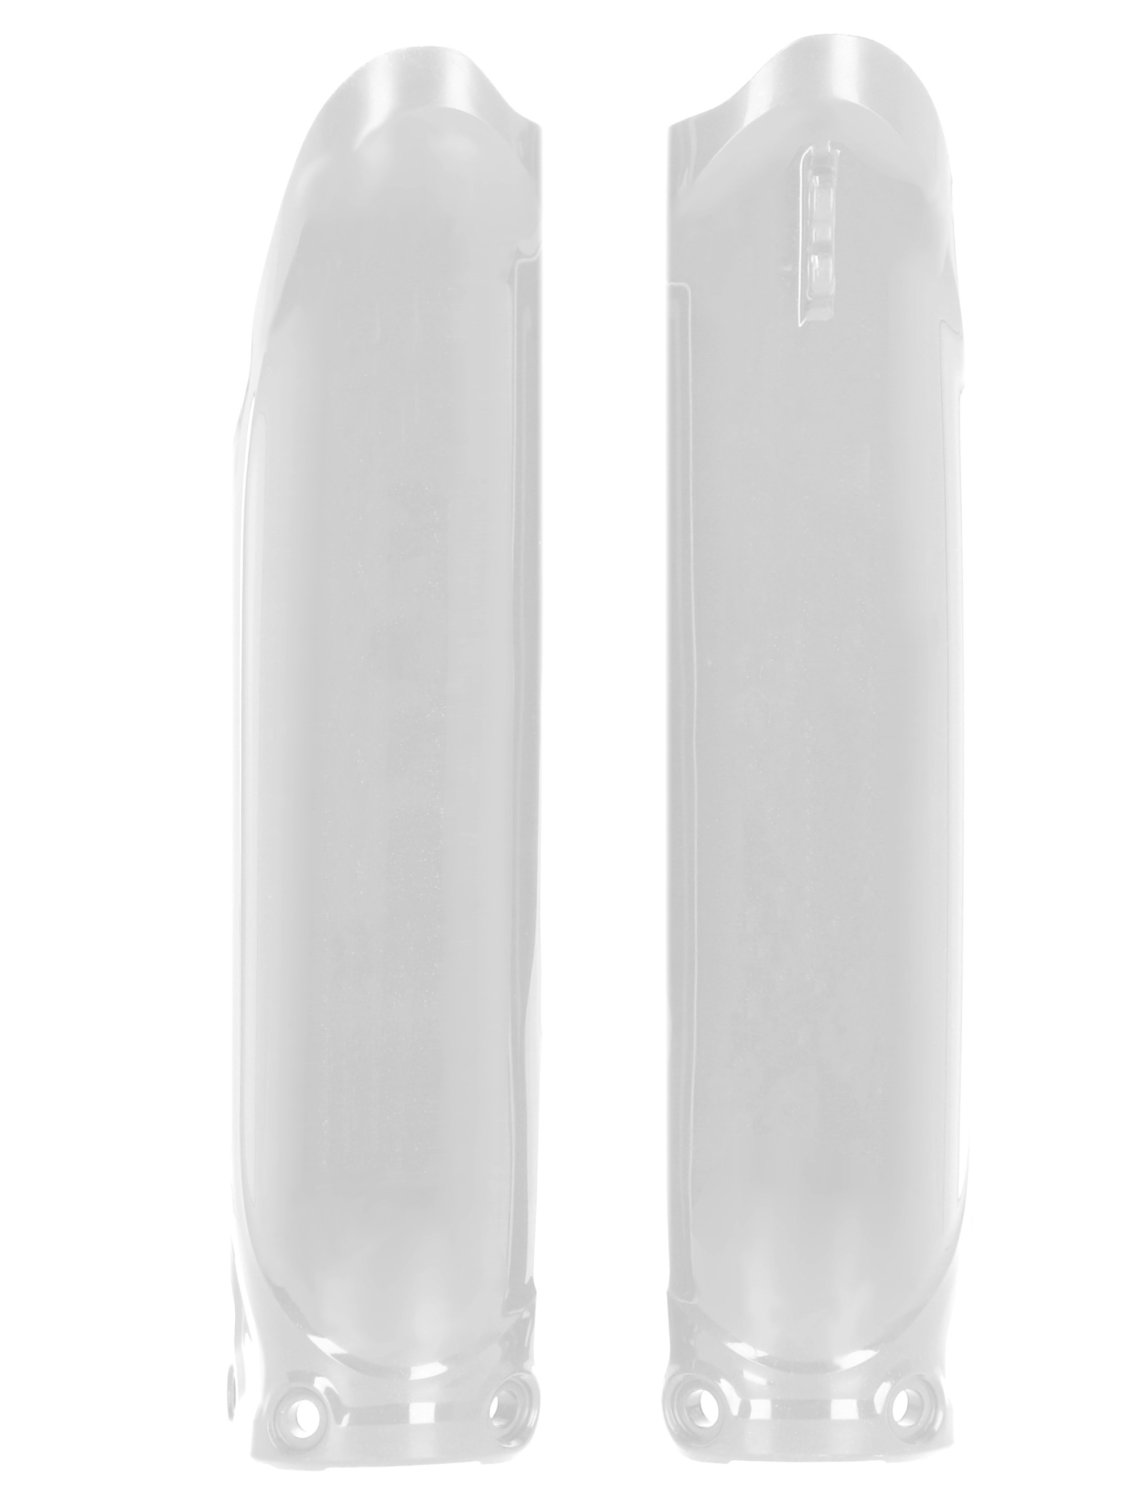 ACERBIS FORK COVERS YAMAHA YZF 250 24 450 23-24 WHITE – Rival Ink Design Co